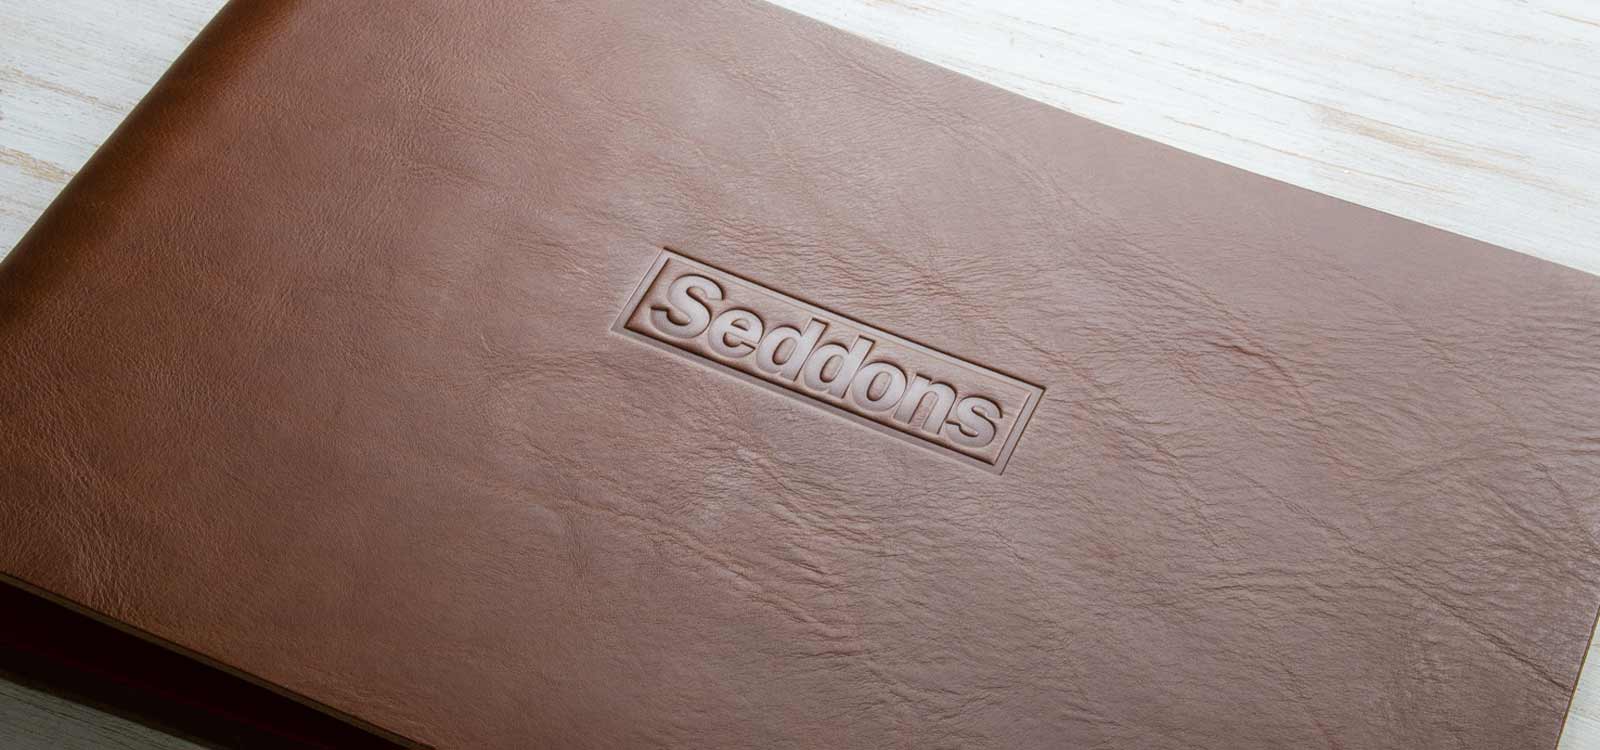 custom leather presentation portfolio screw post binder a3 landscape embossed personalised cover made bespoke by hartnack and co 